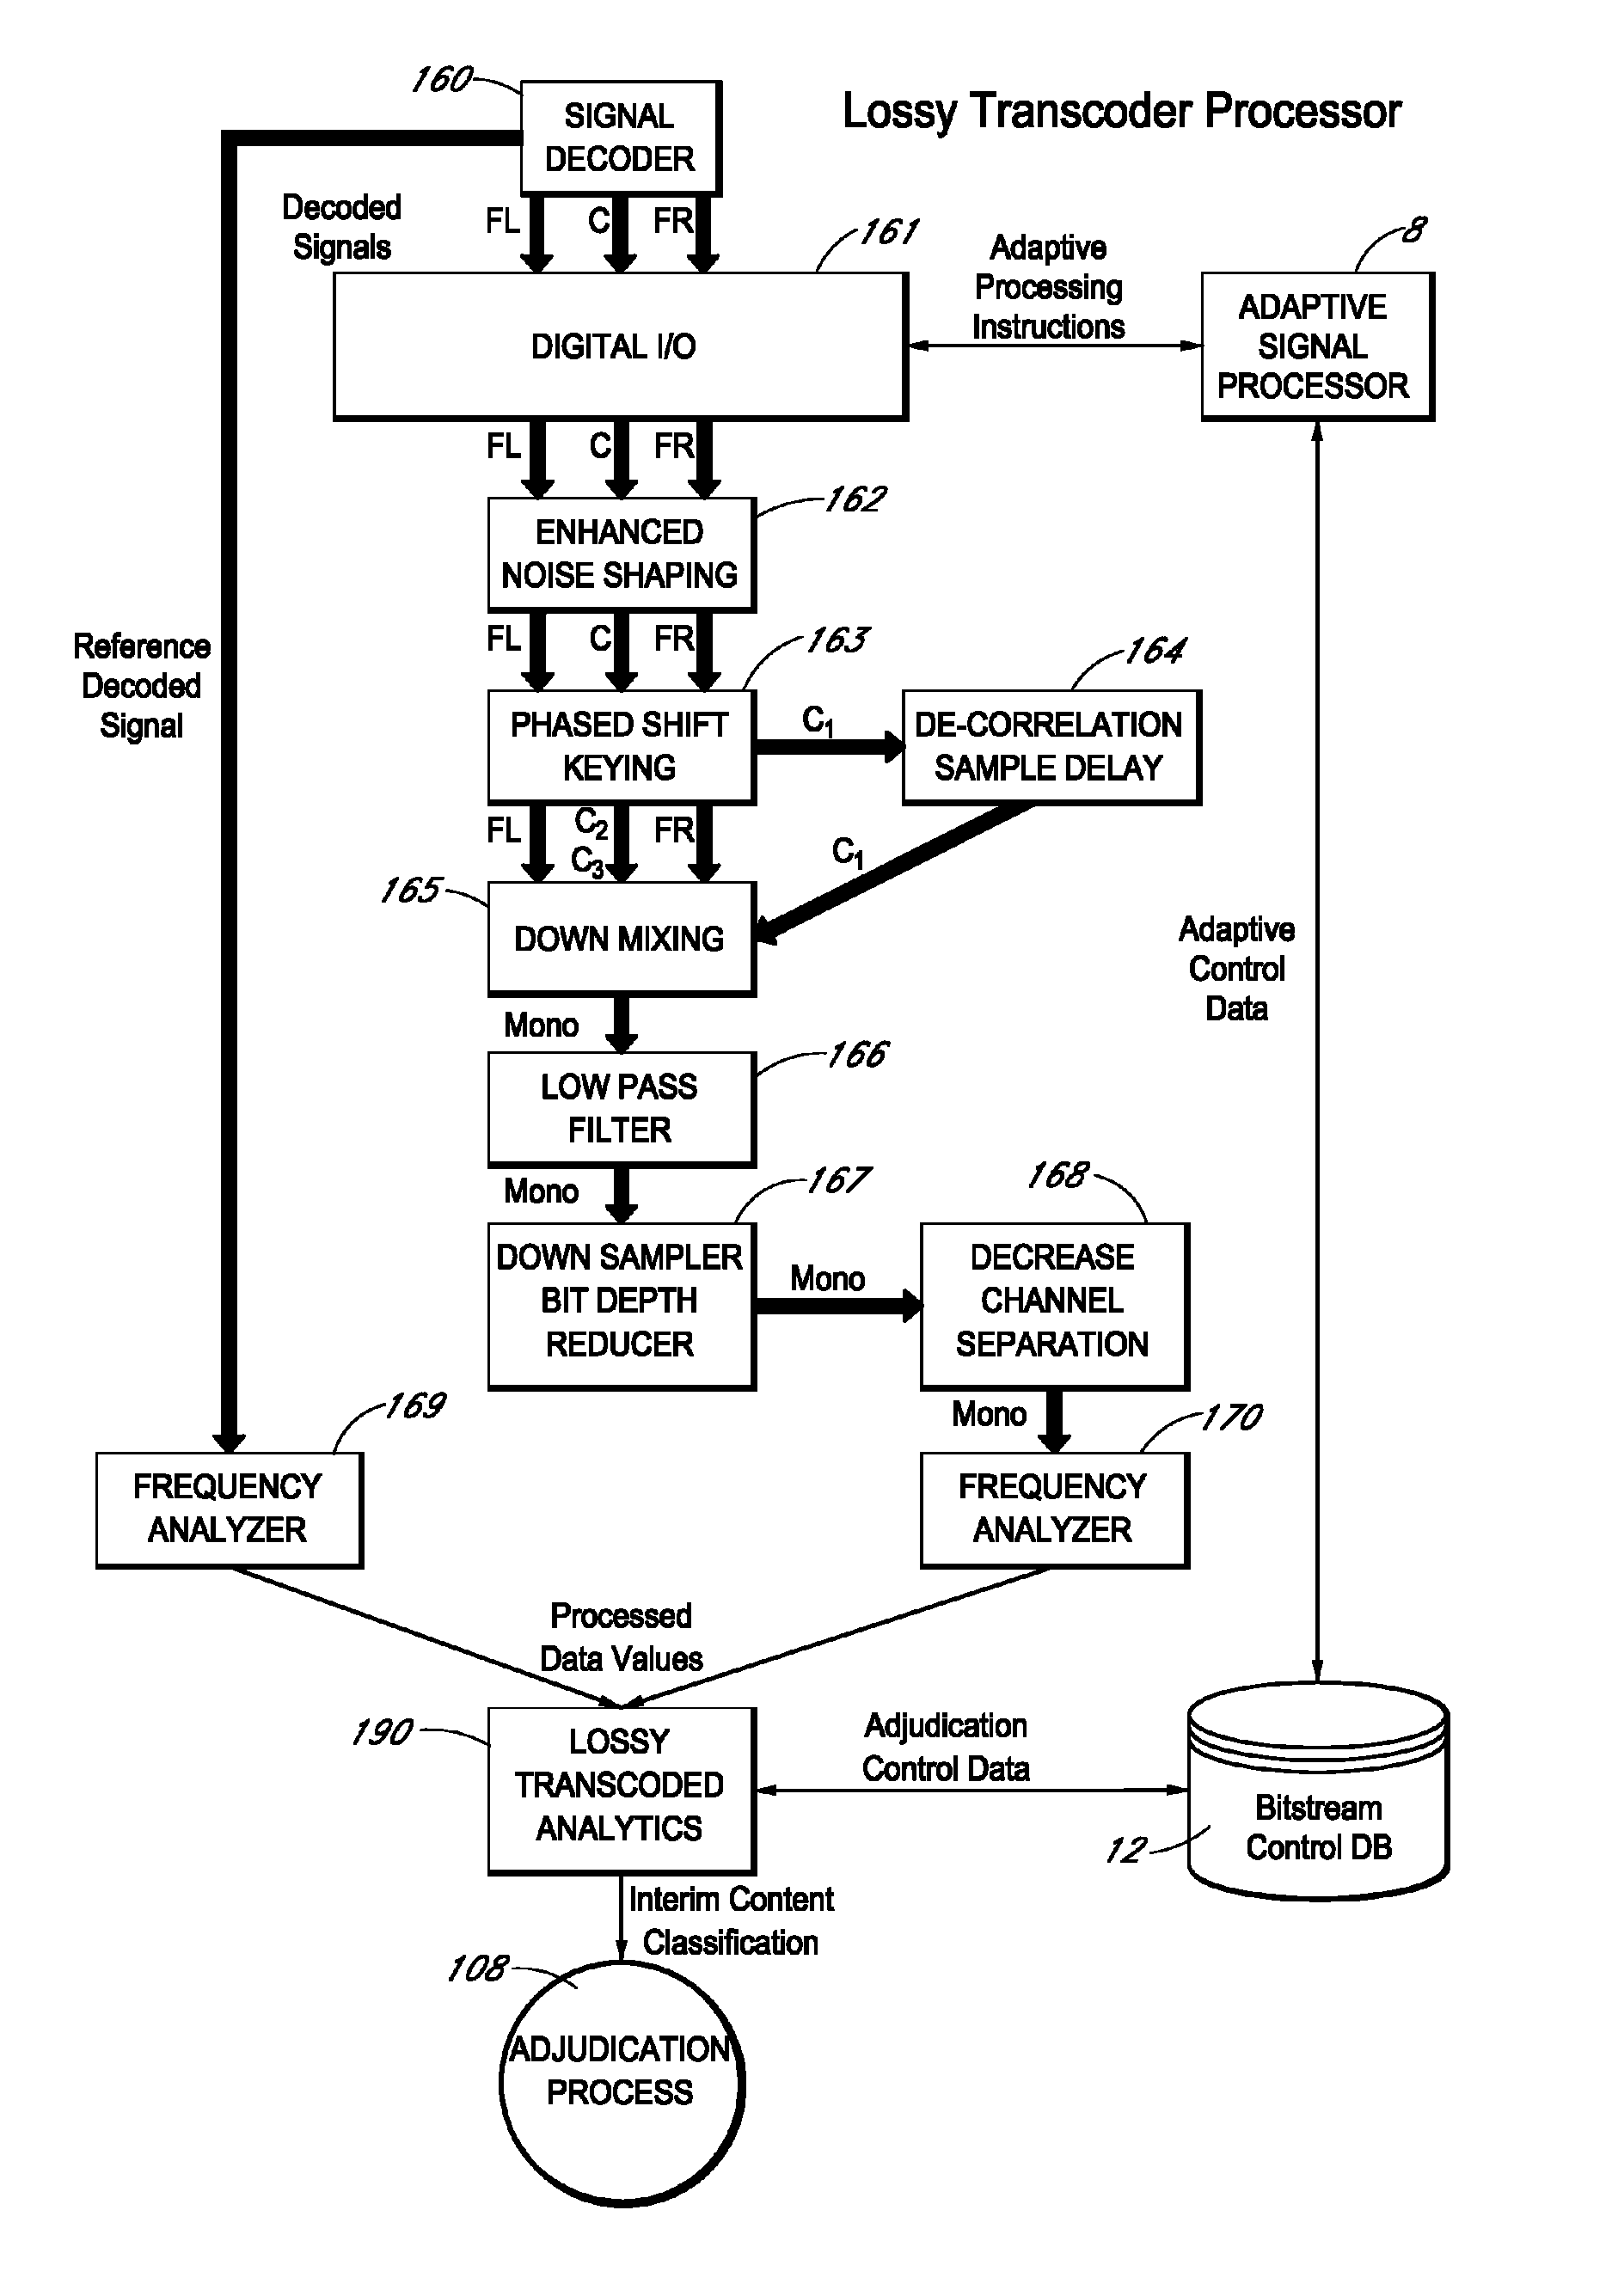 Methods and systems for identifying content types